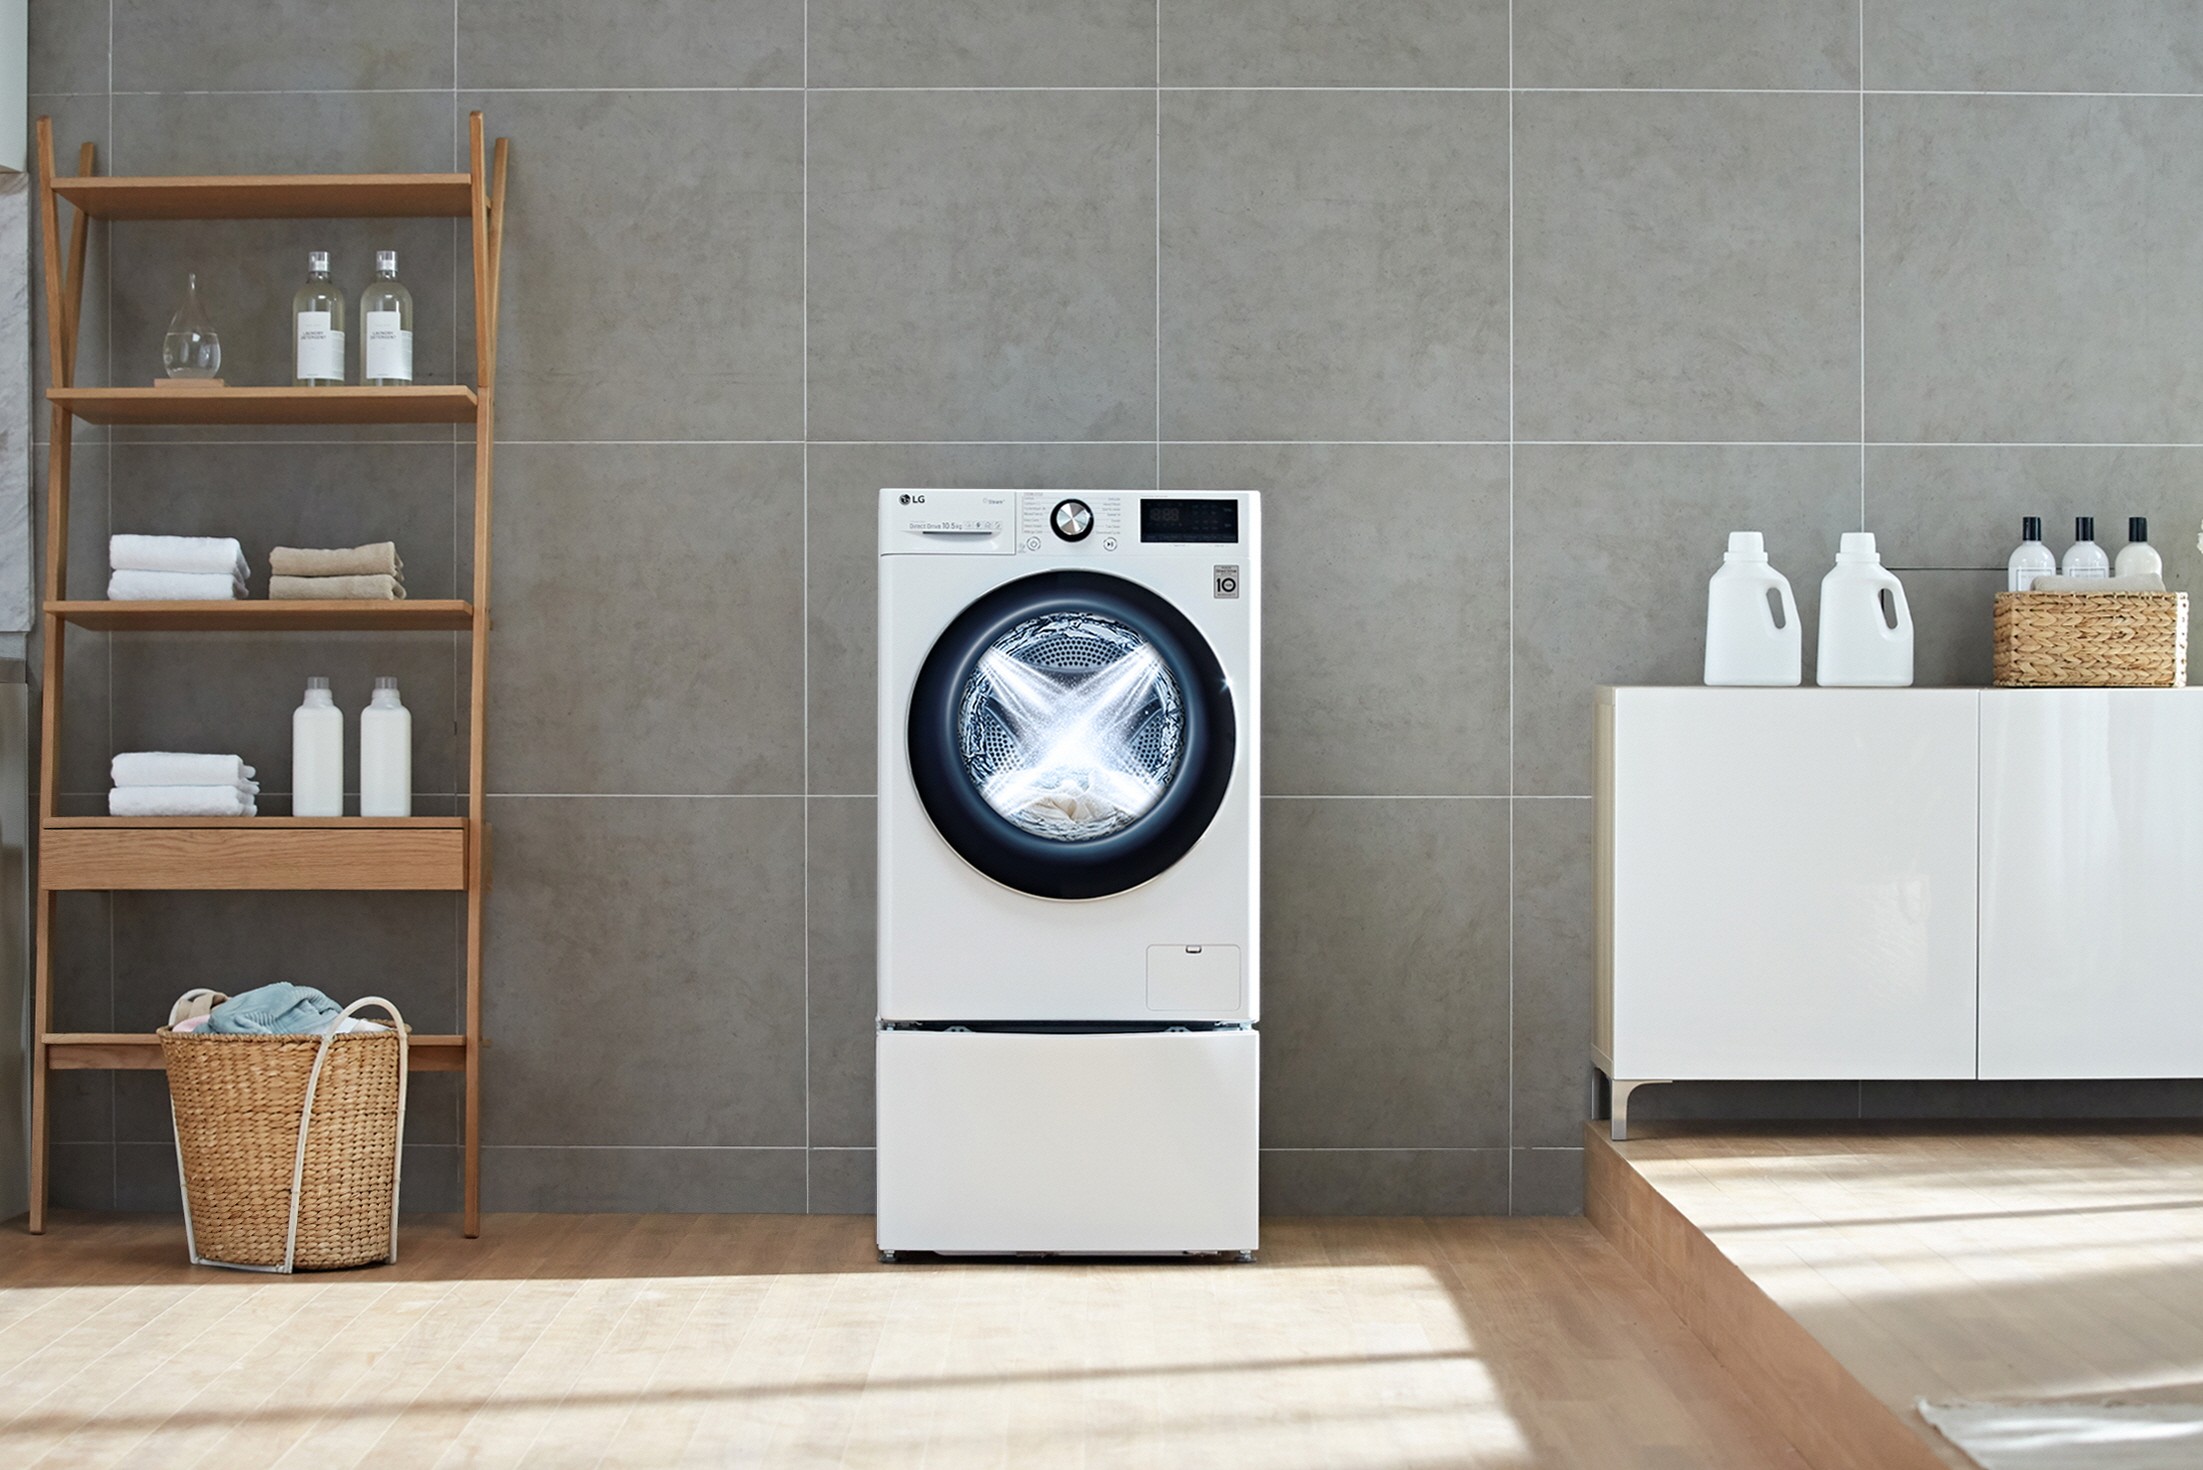 LG WASHING MACHINES WITH ARTIFICIAL INTELLIGENCE AND DIRECT DRIVE